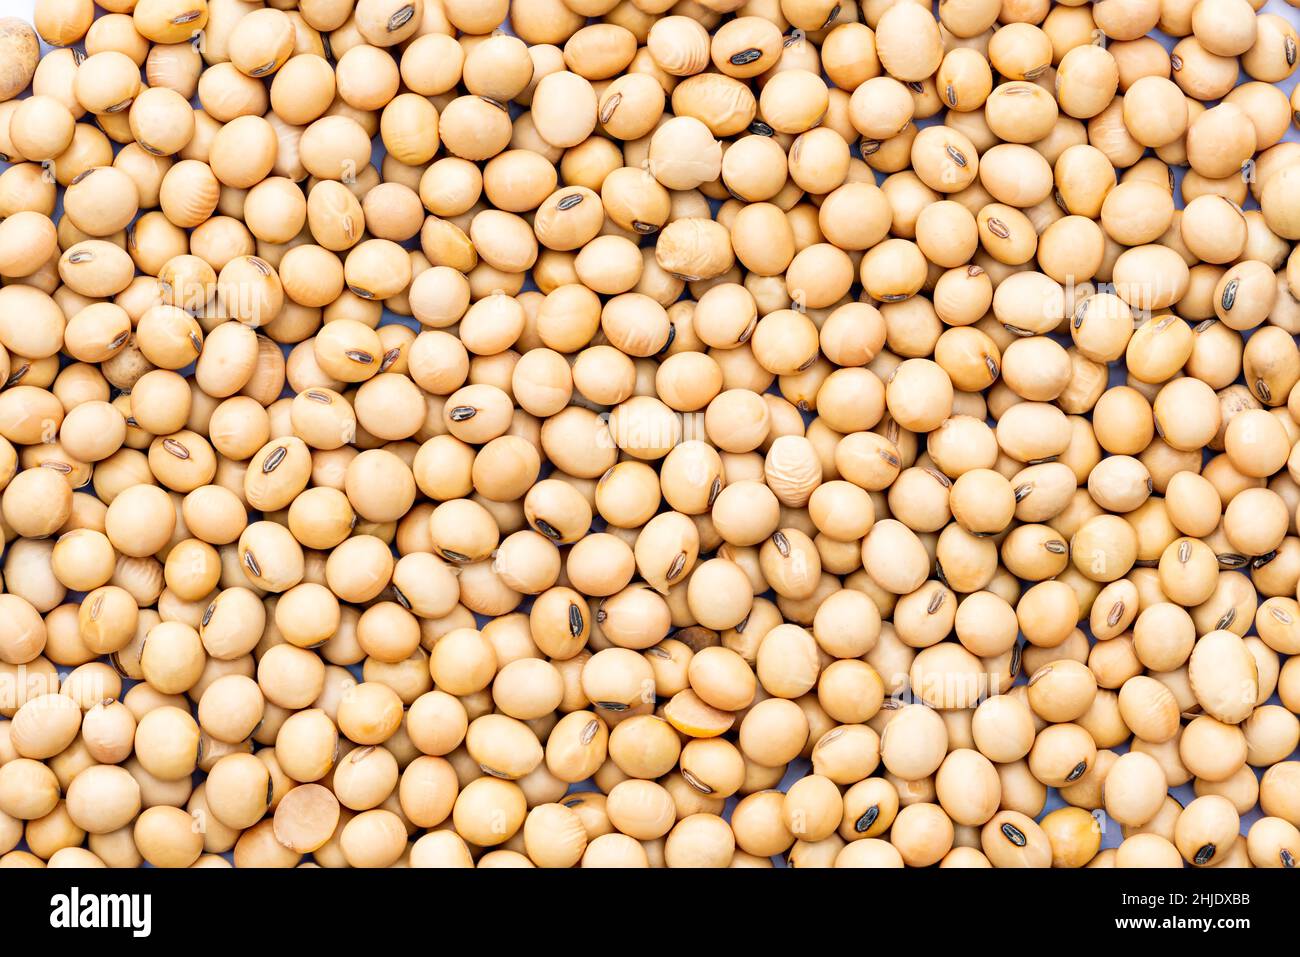 Top view of soy bean background. Closeup view of soy beans. Soy bean is the important plant protein for human. Stock Photo